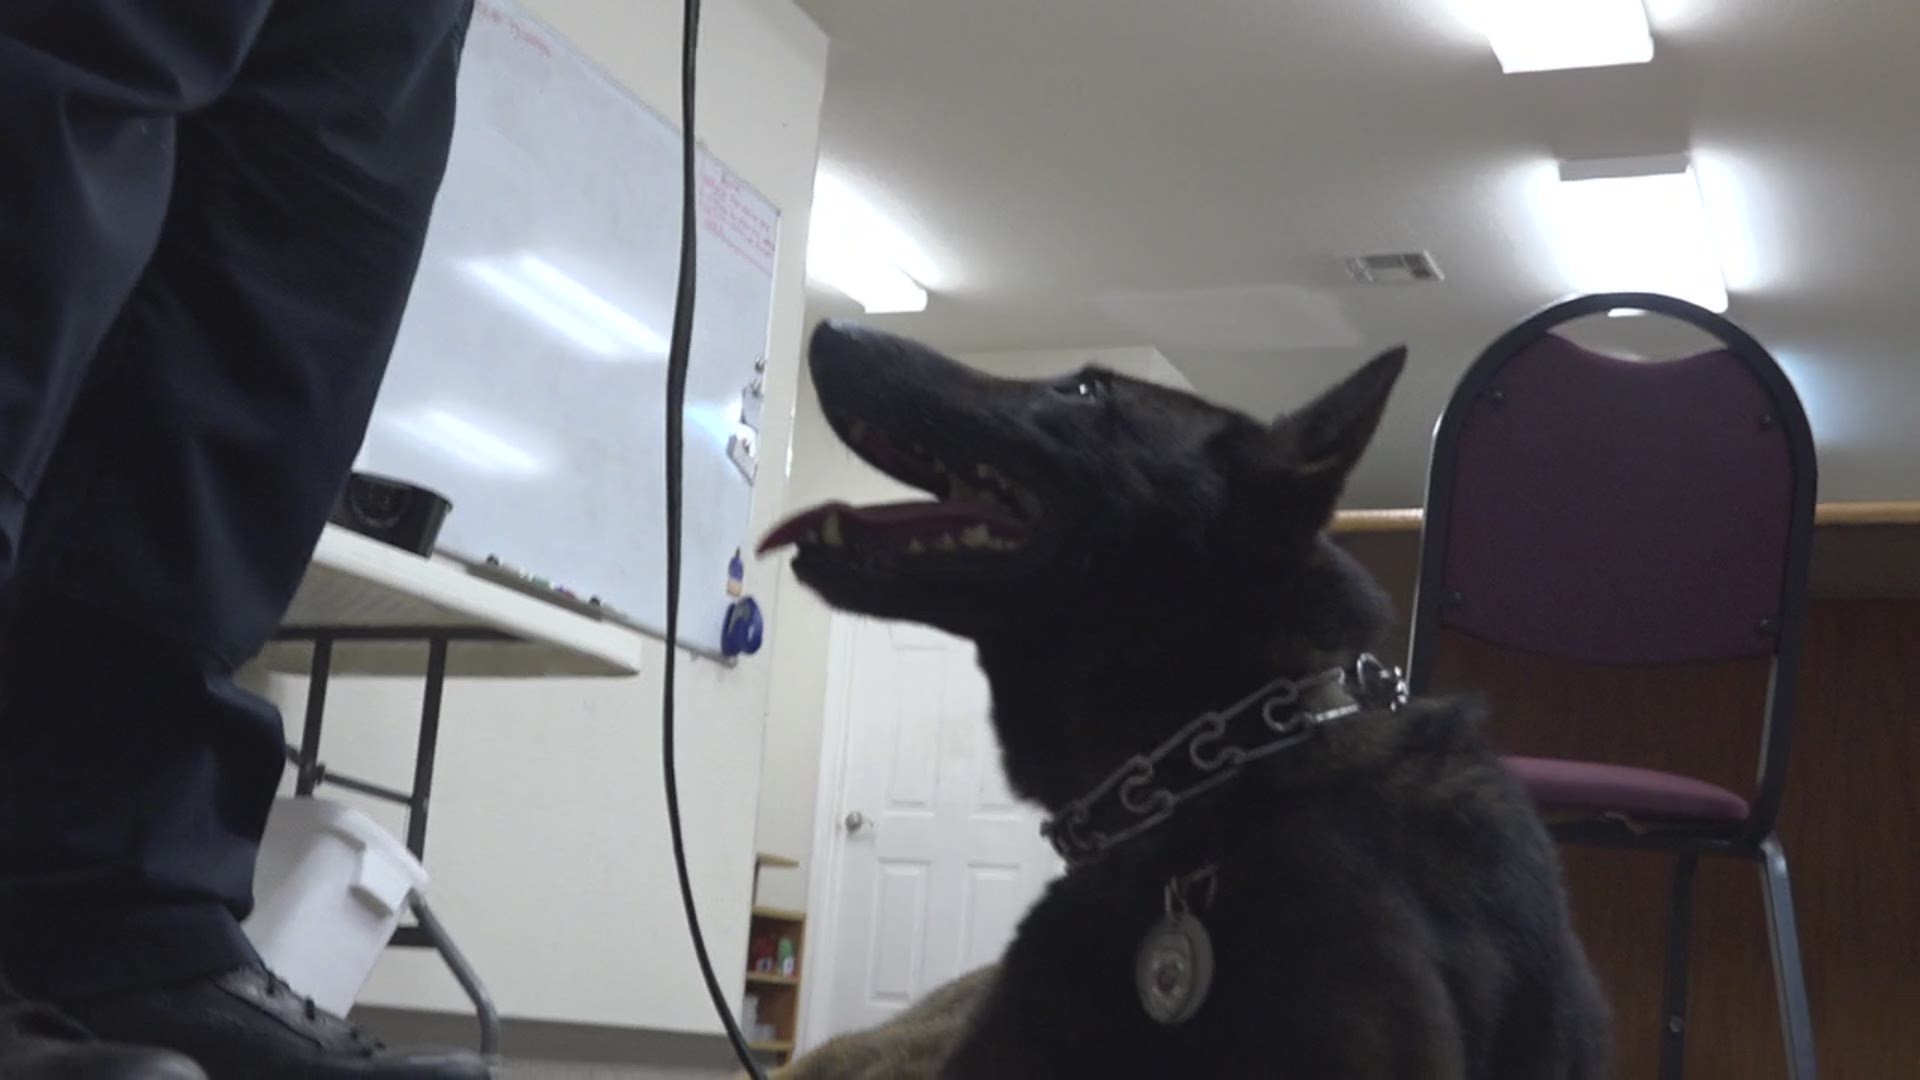 Leroy joins Lumberton PD as the second K9 officer